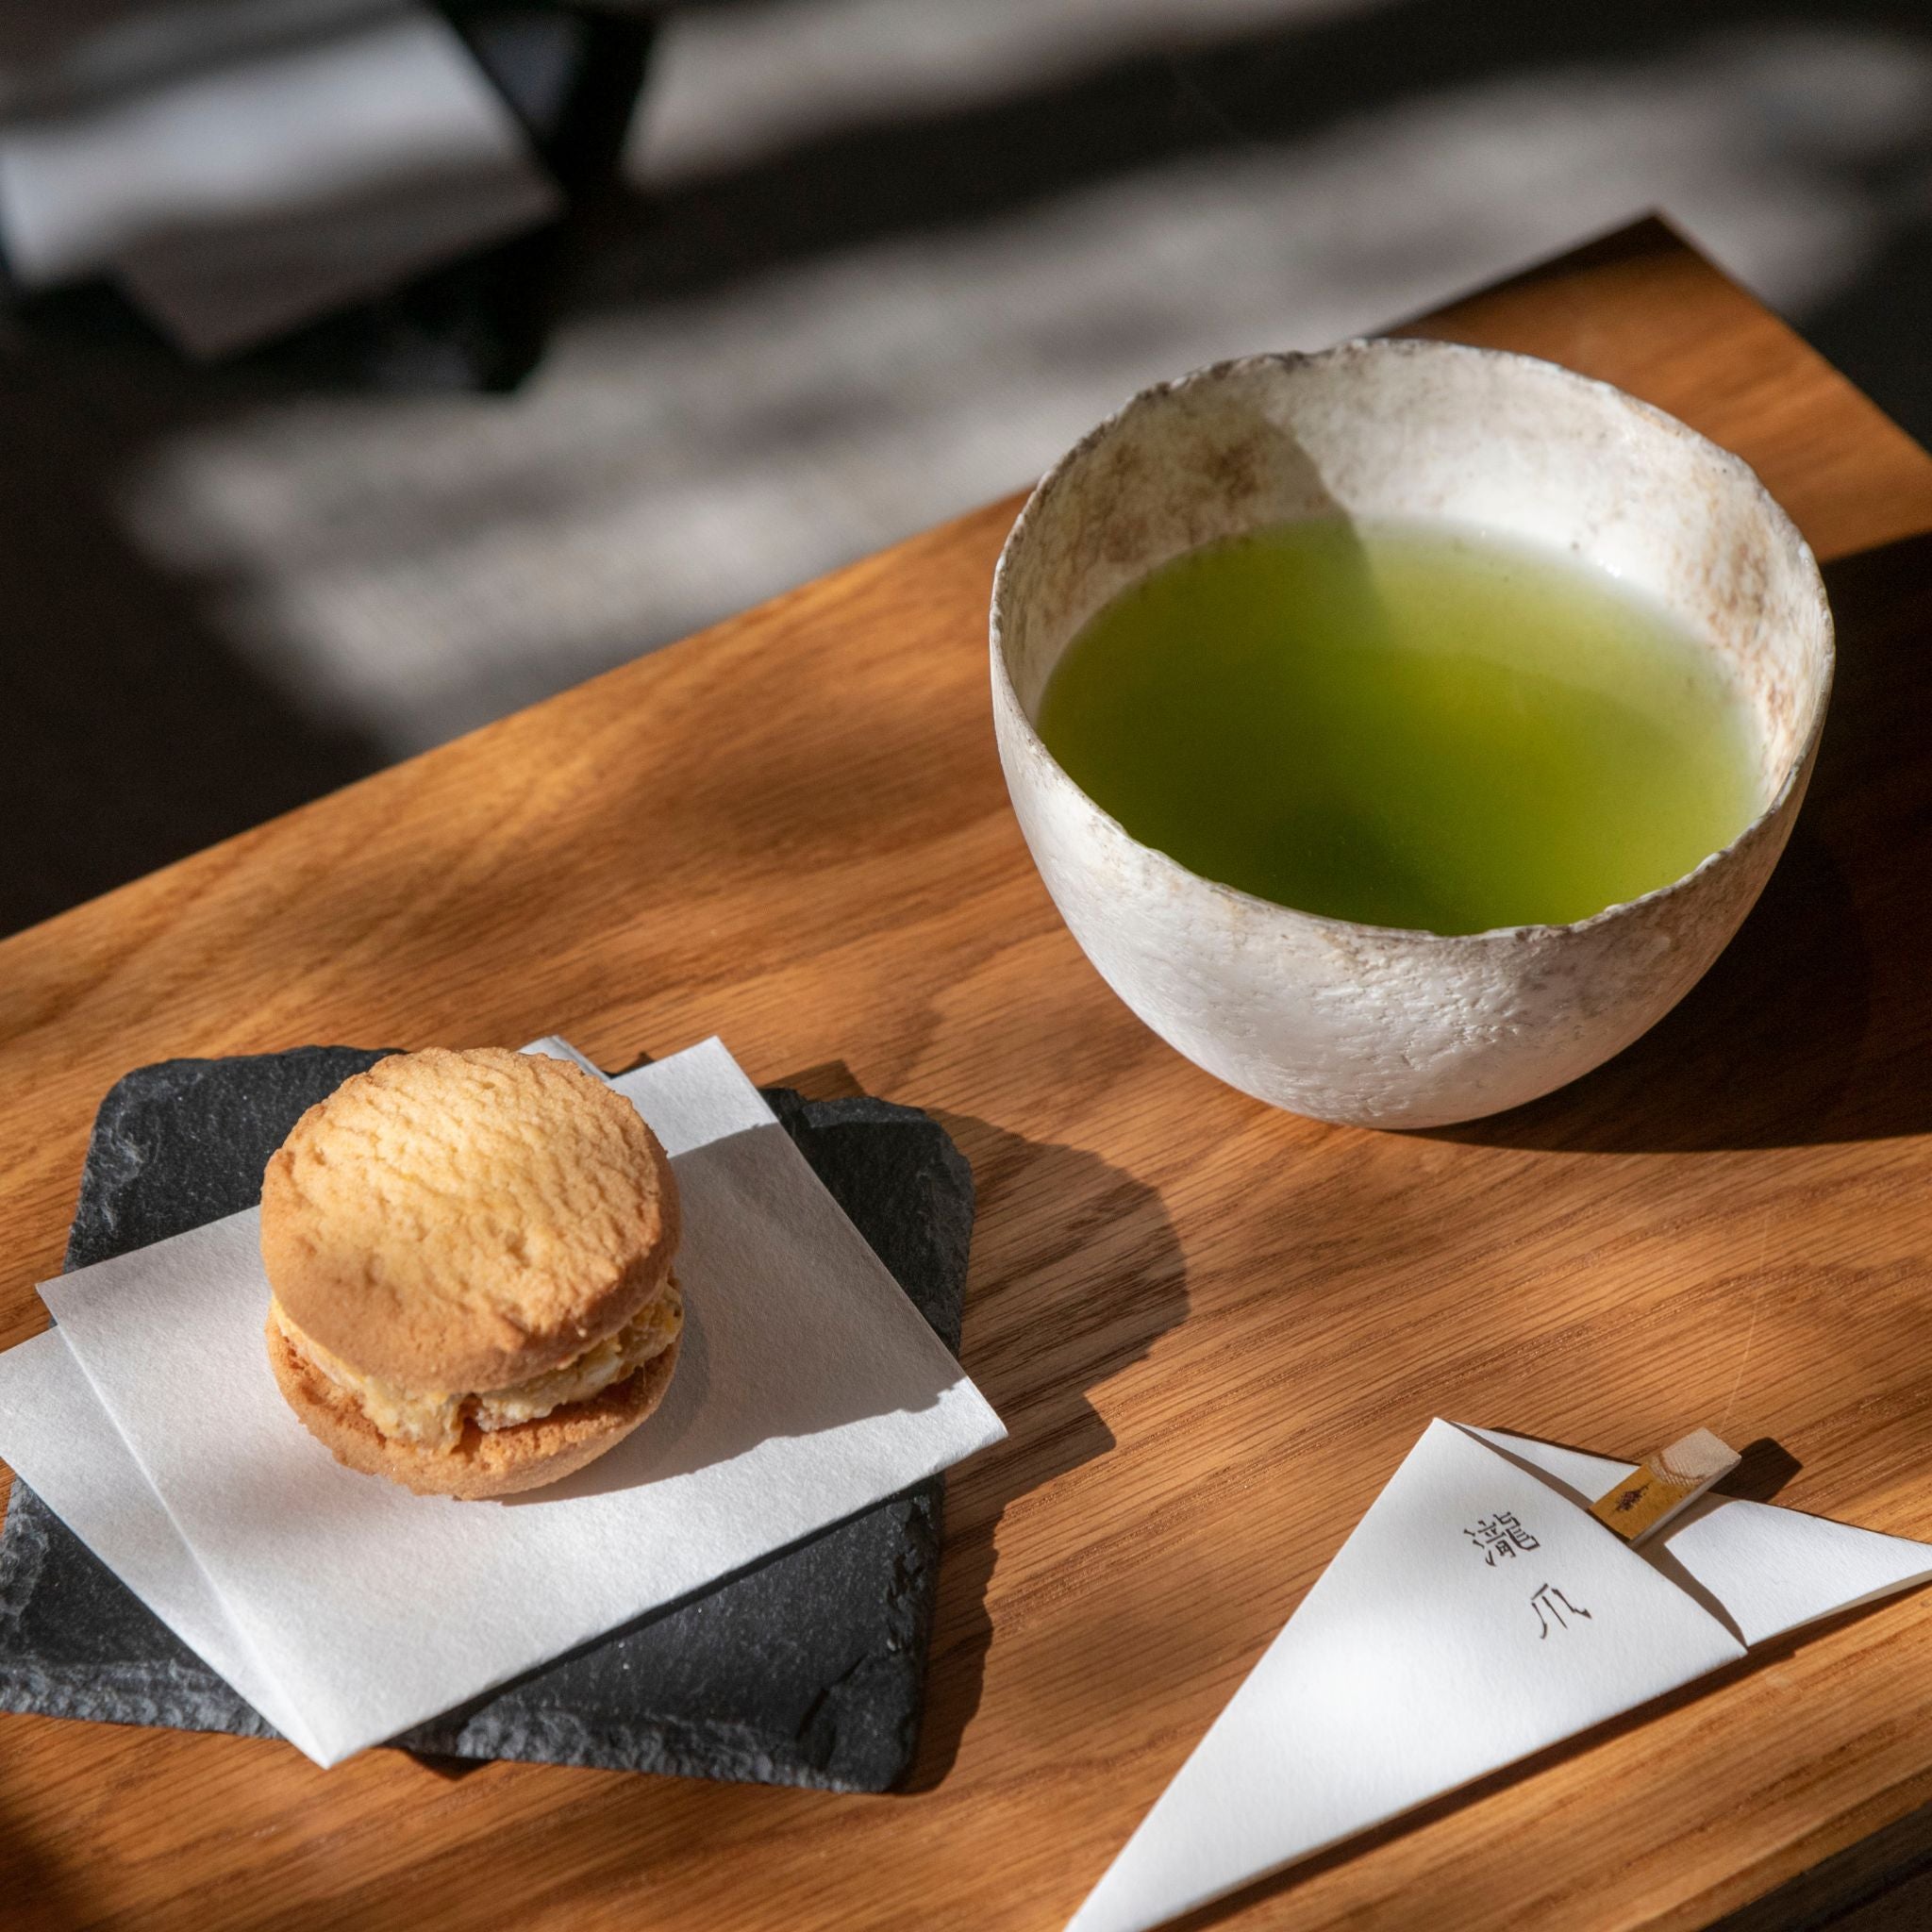 【Balancing Tea -Session in English- 】 Three kinds of tea served with confectionery